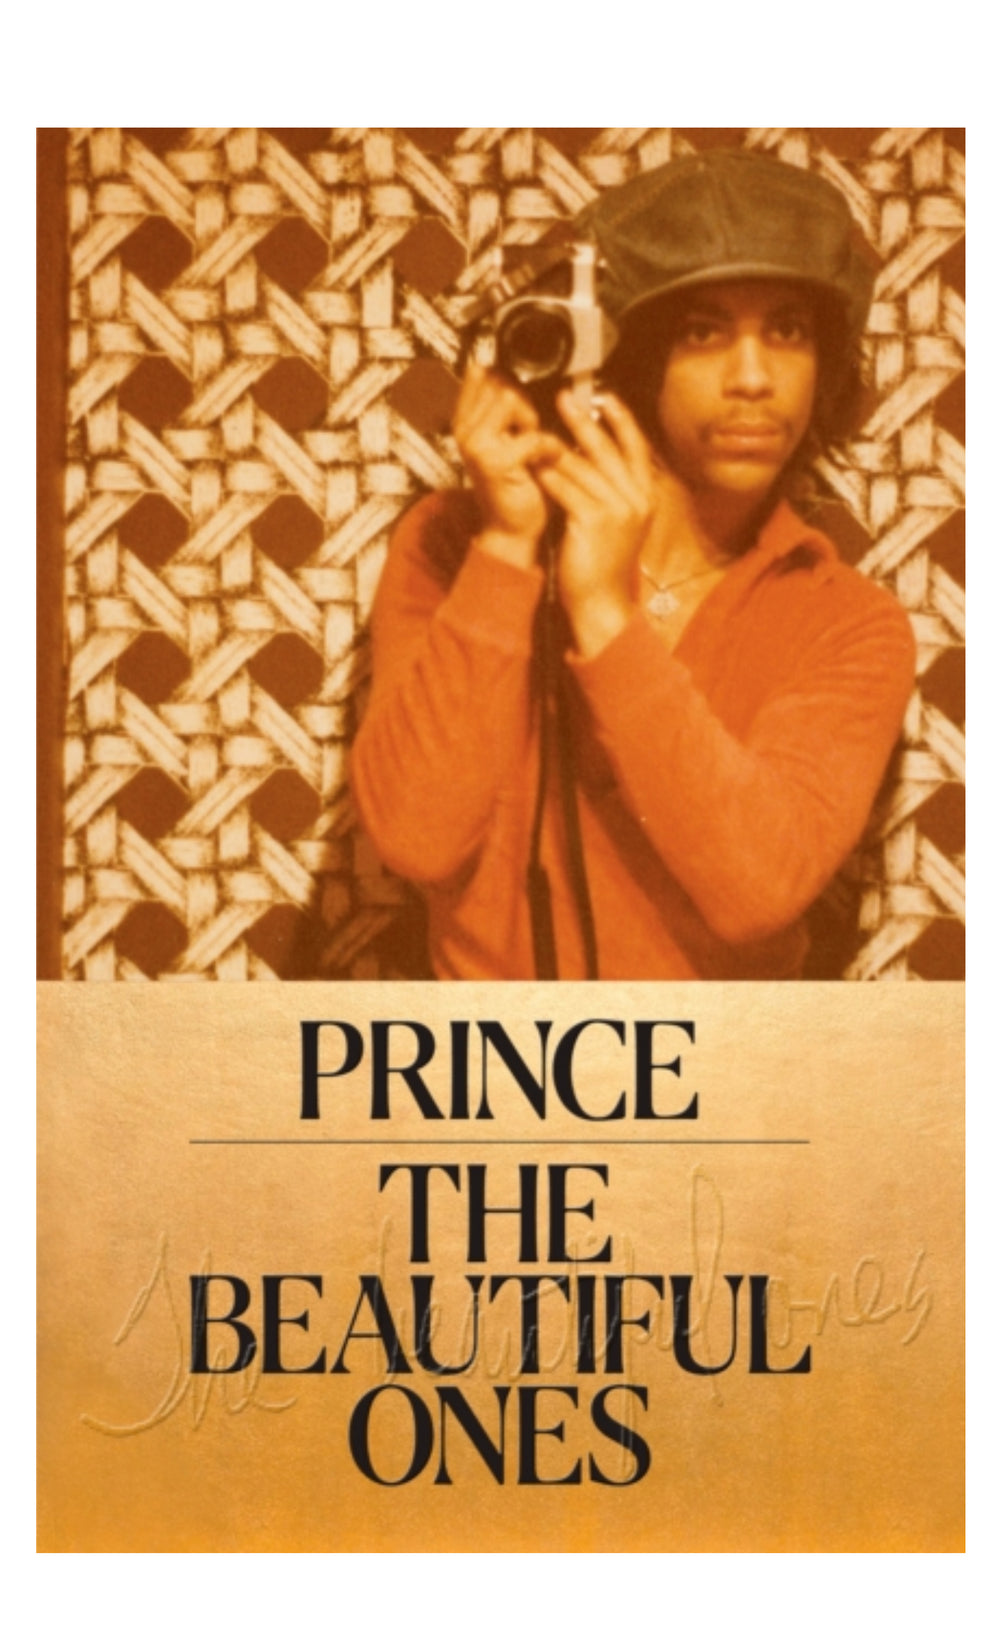 Prince The Beautiful Ones Hardback Book 288 Pages